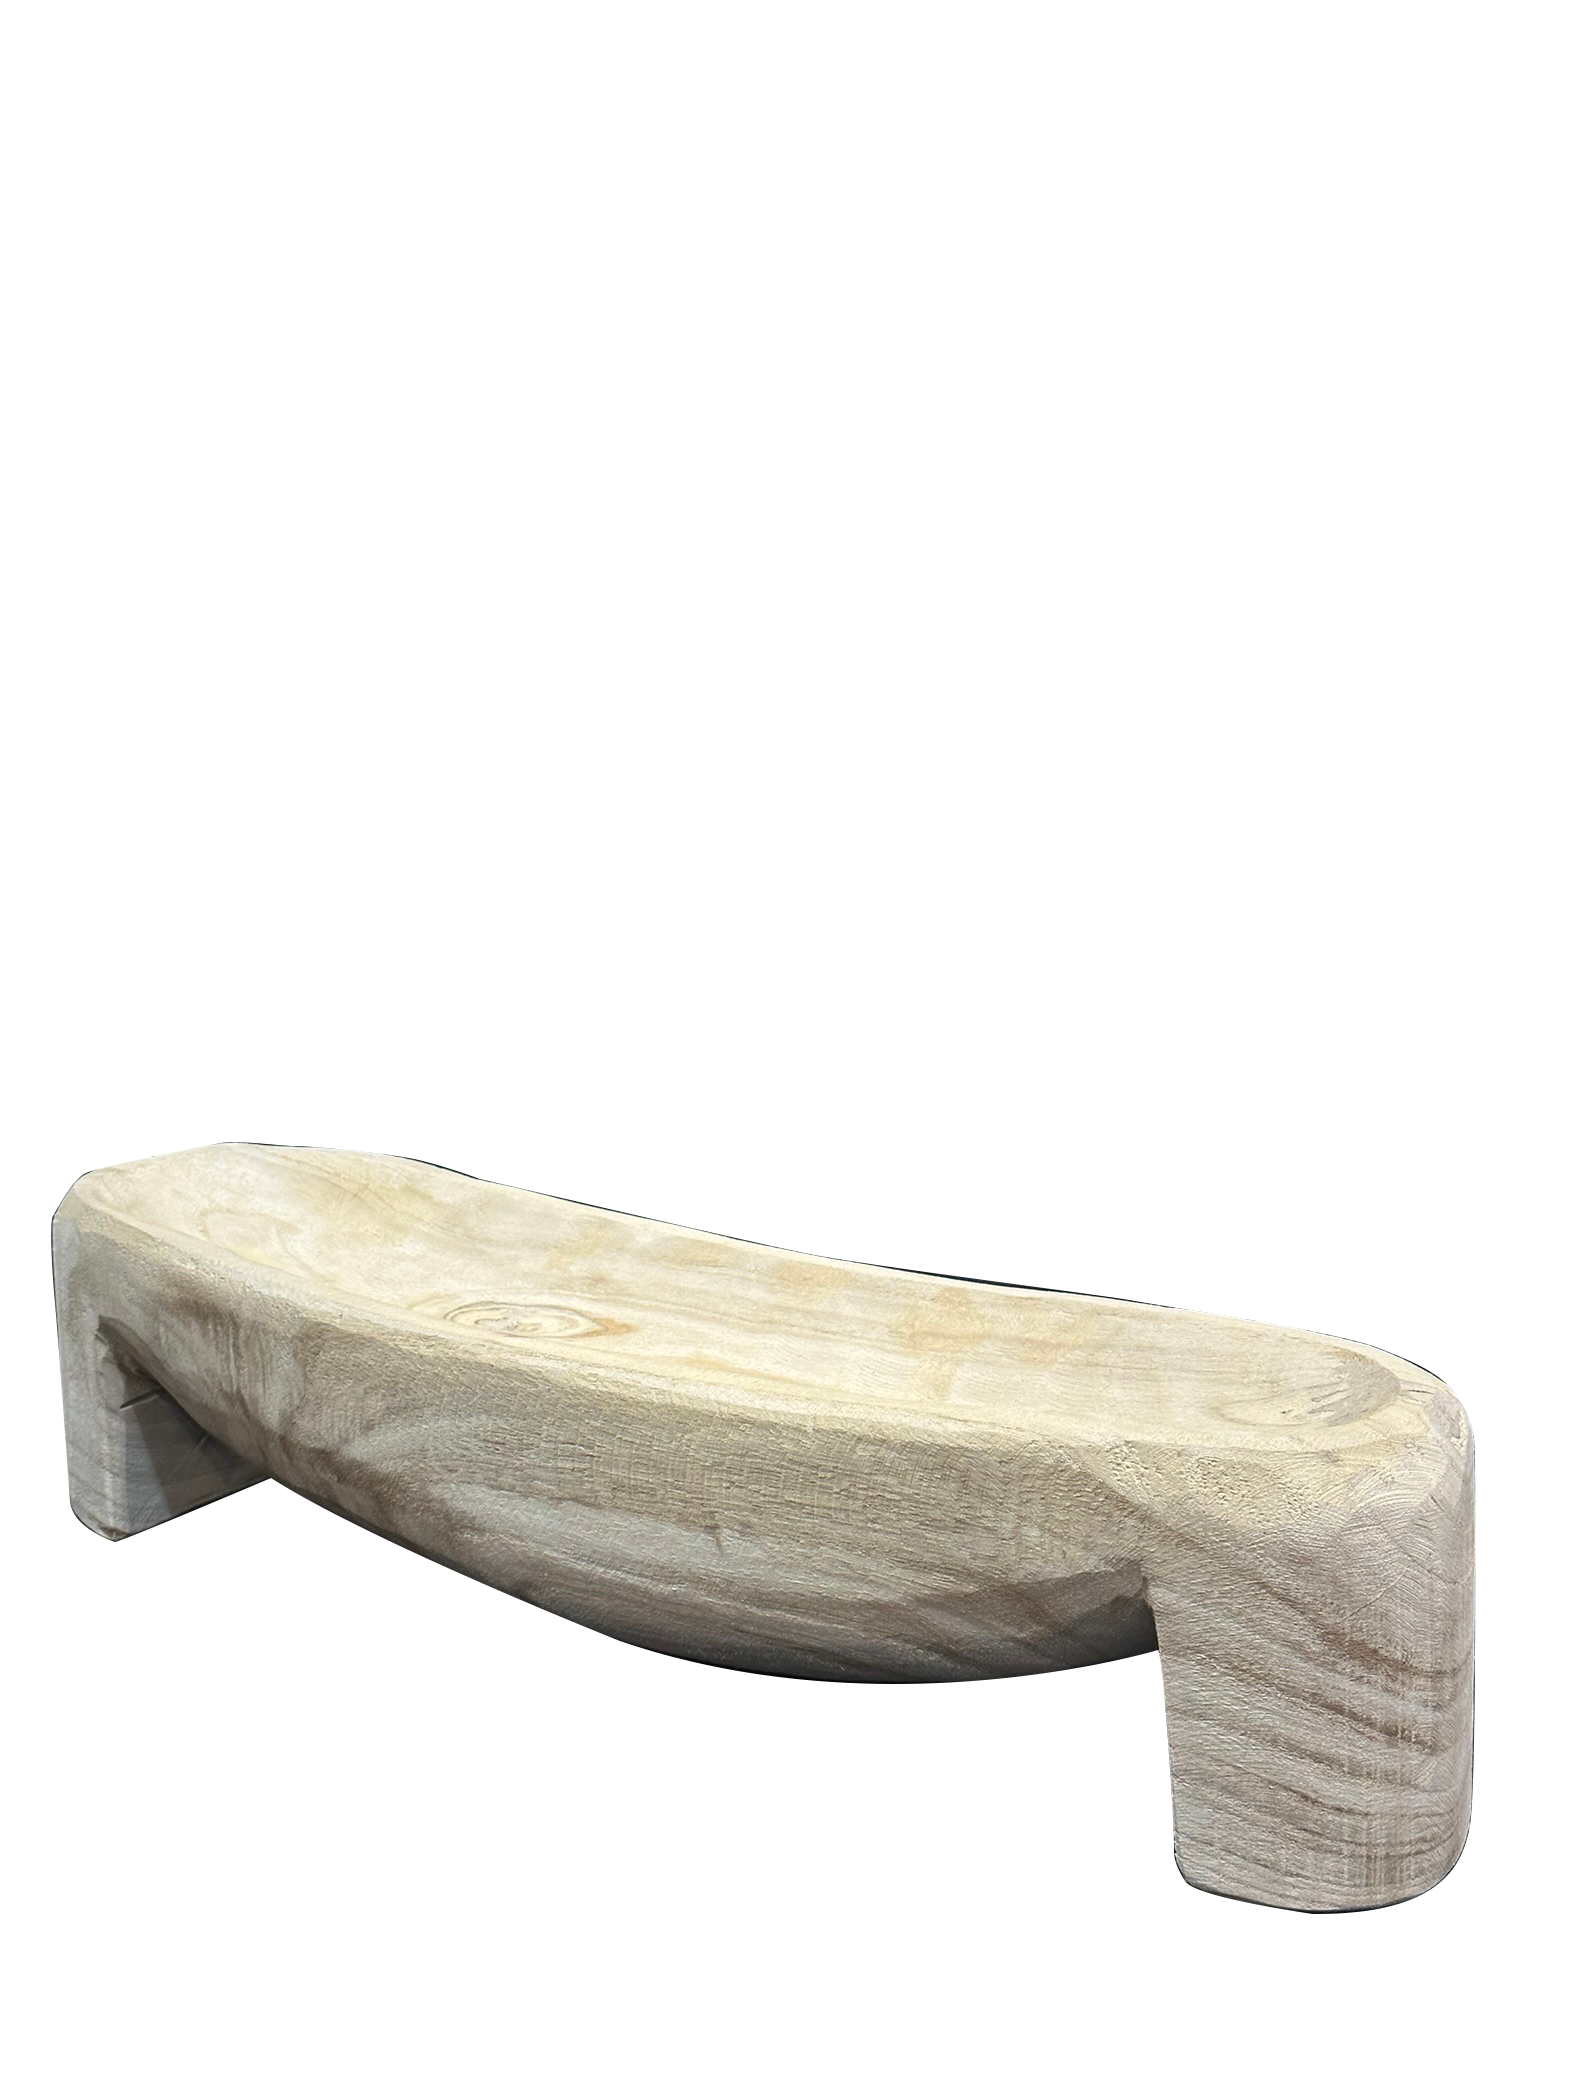 Bench Shaped Wooden Vase - Sunset Gifts Store